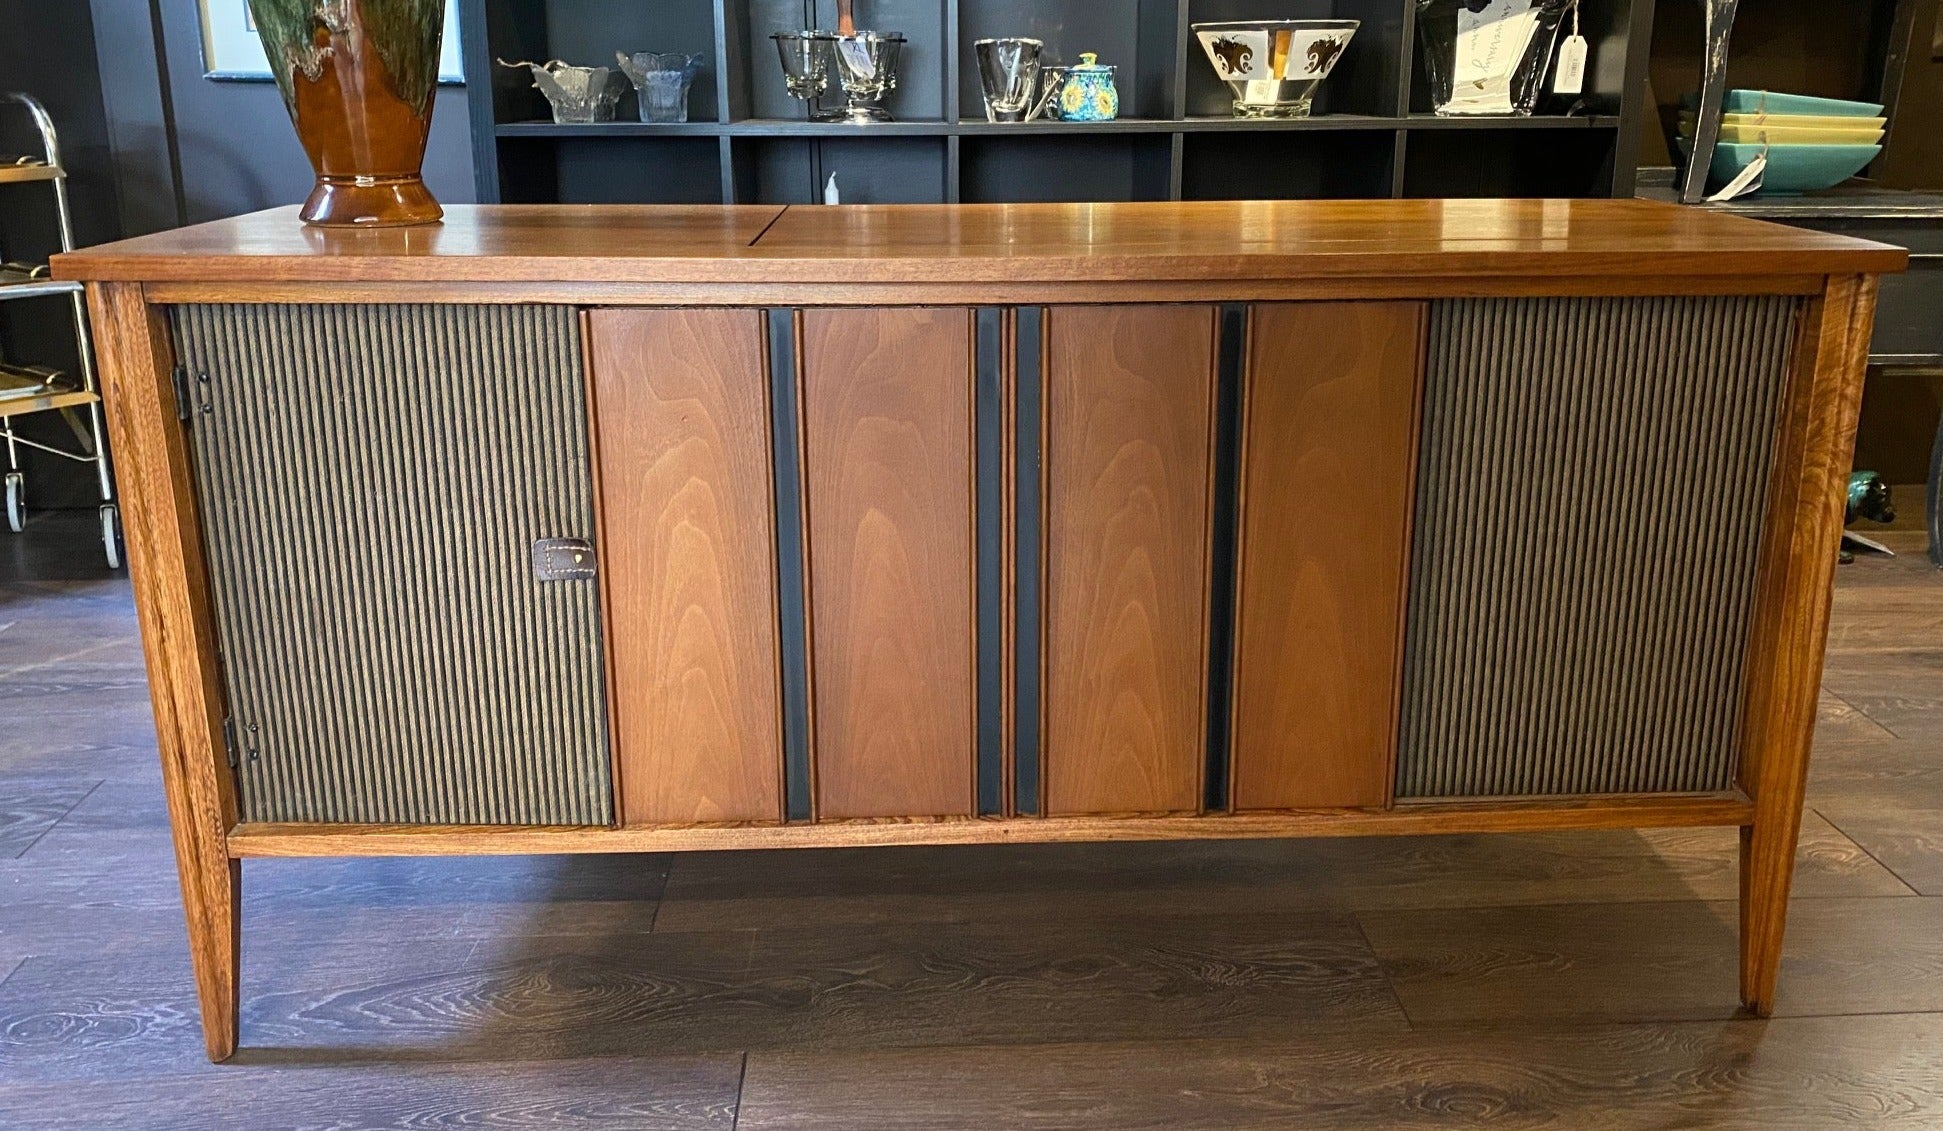 Retro stereo console bar- Cook Street Vintage